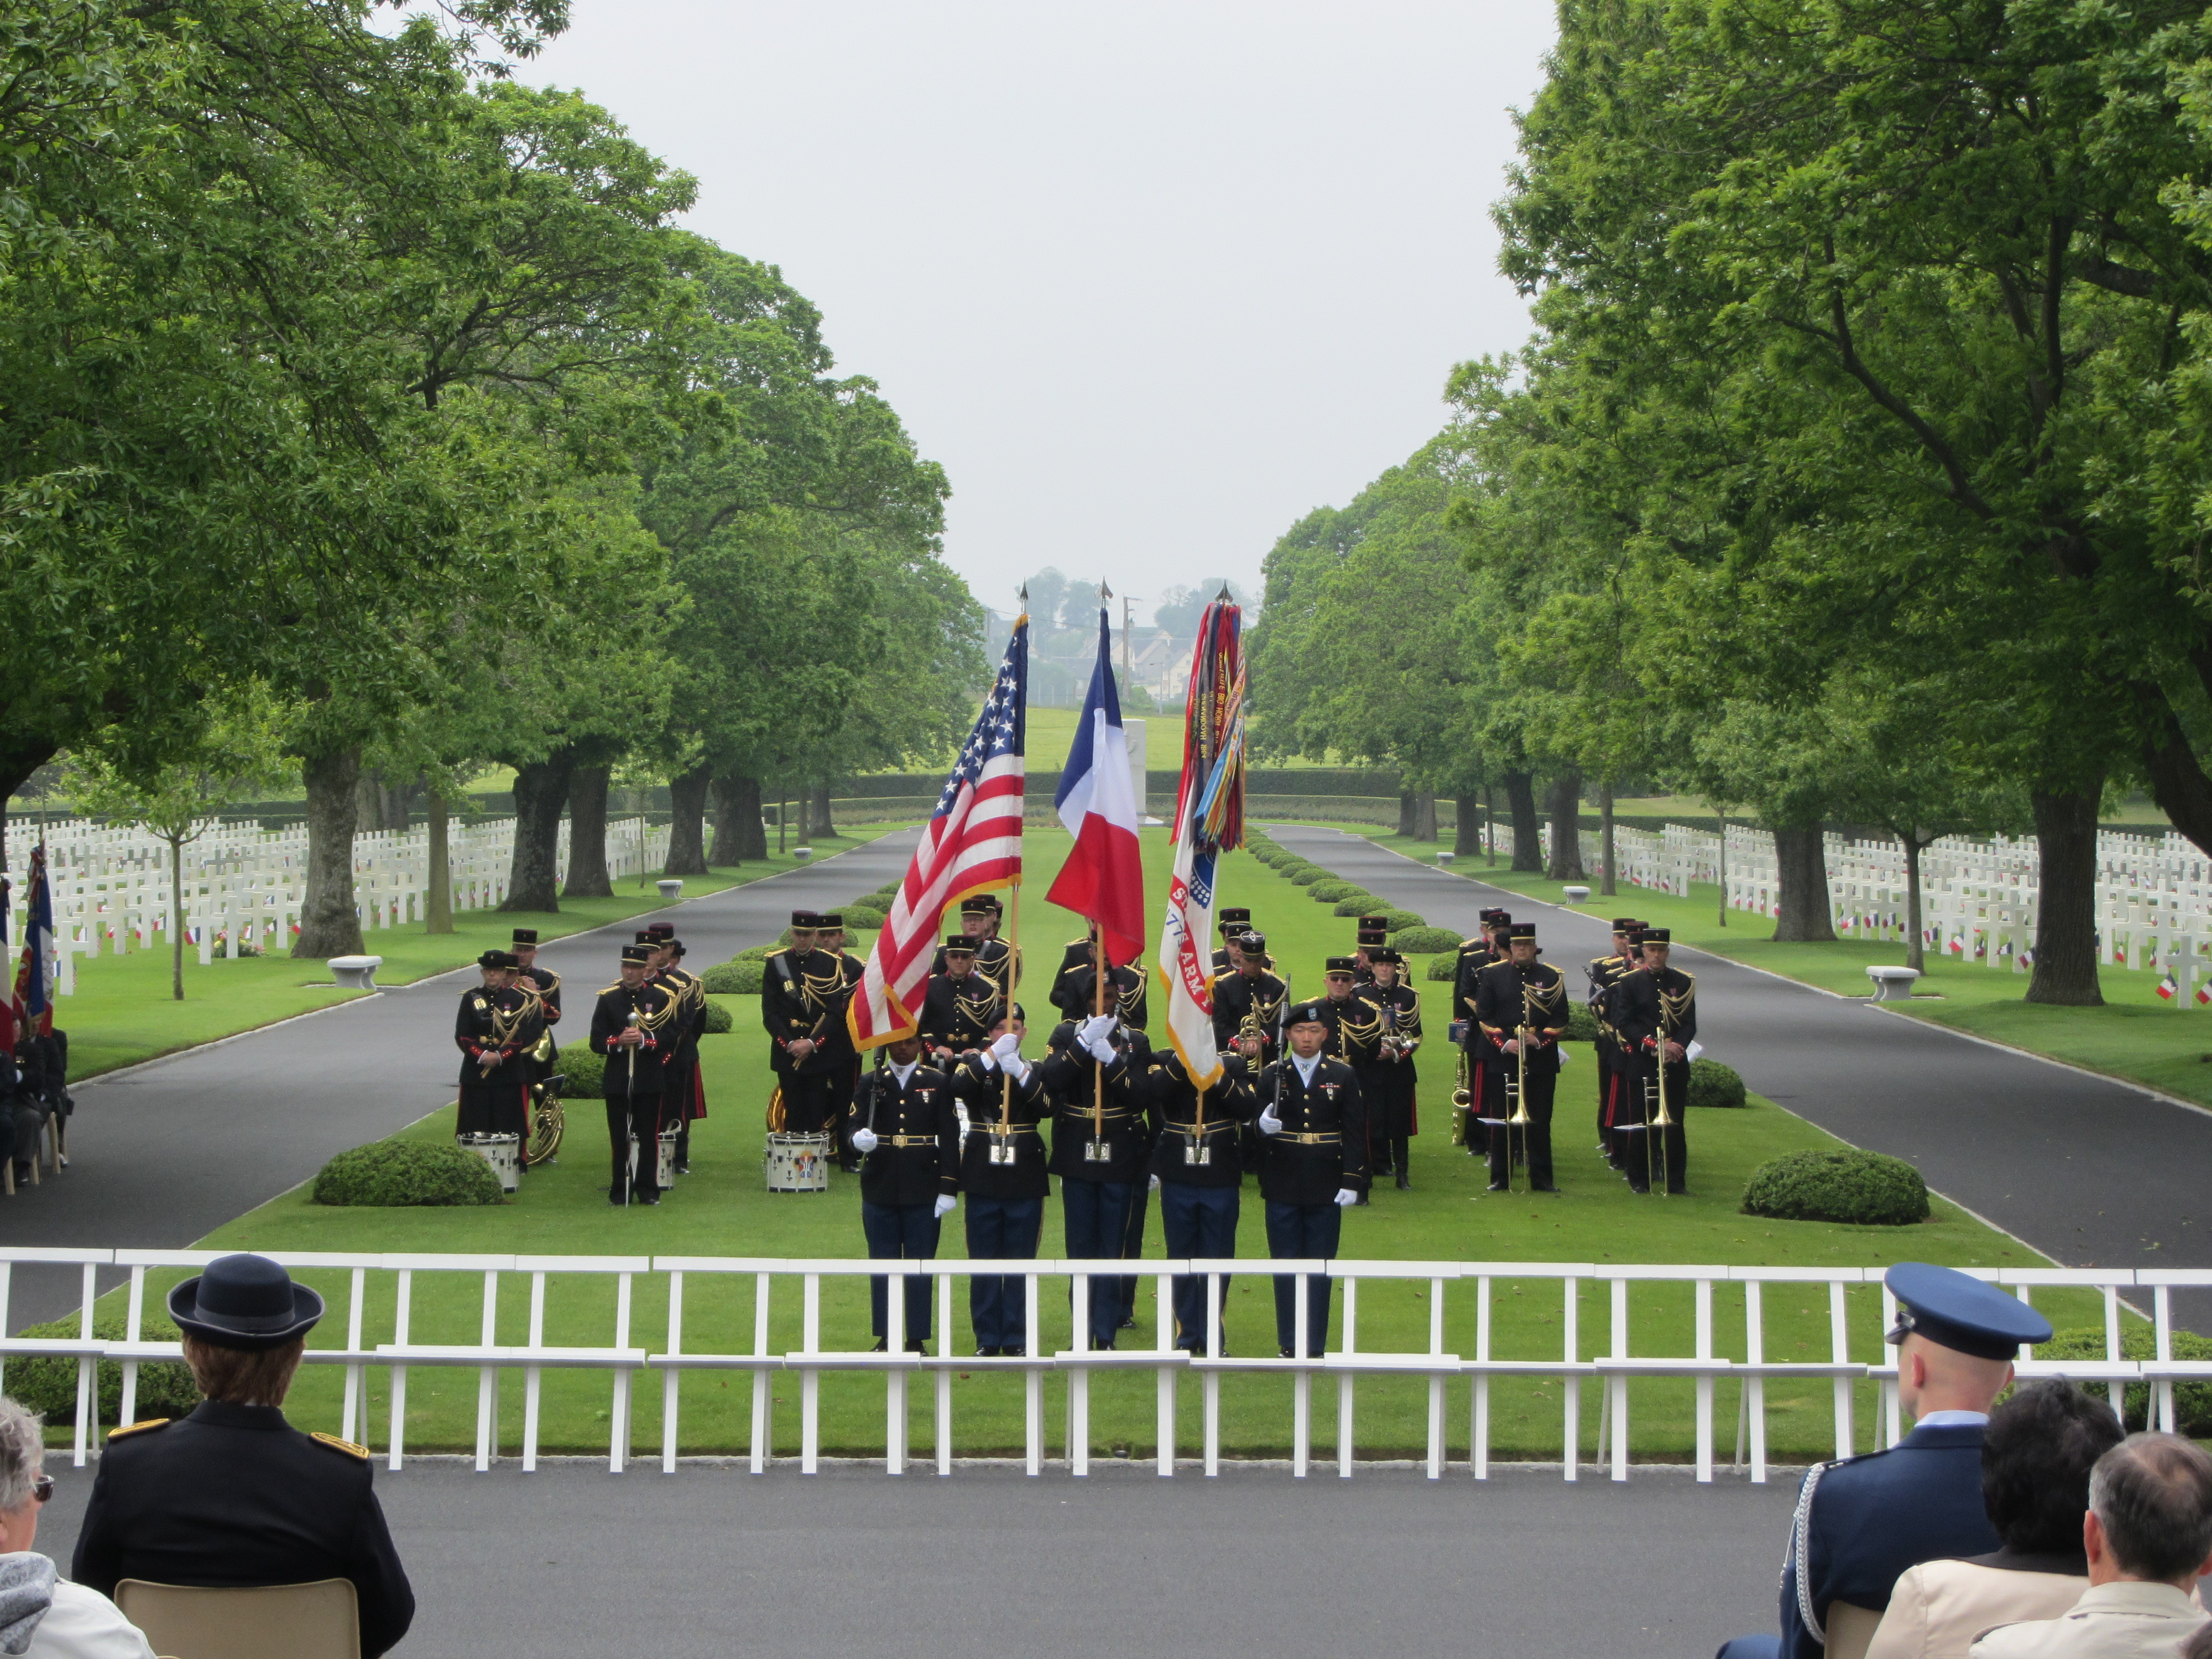 A U.S. Color Guard stands in the forefront, with the band in the background.